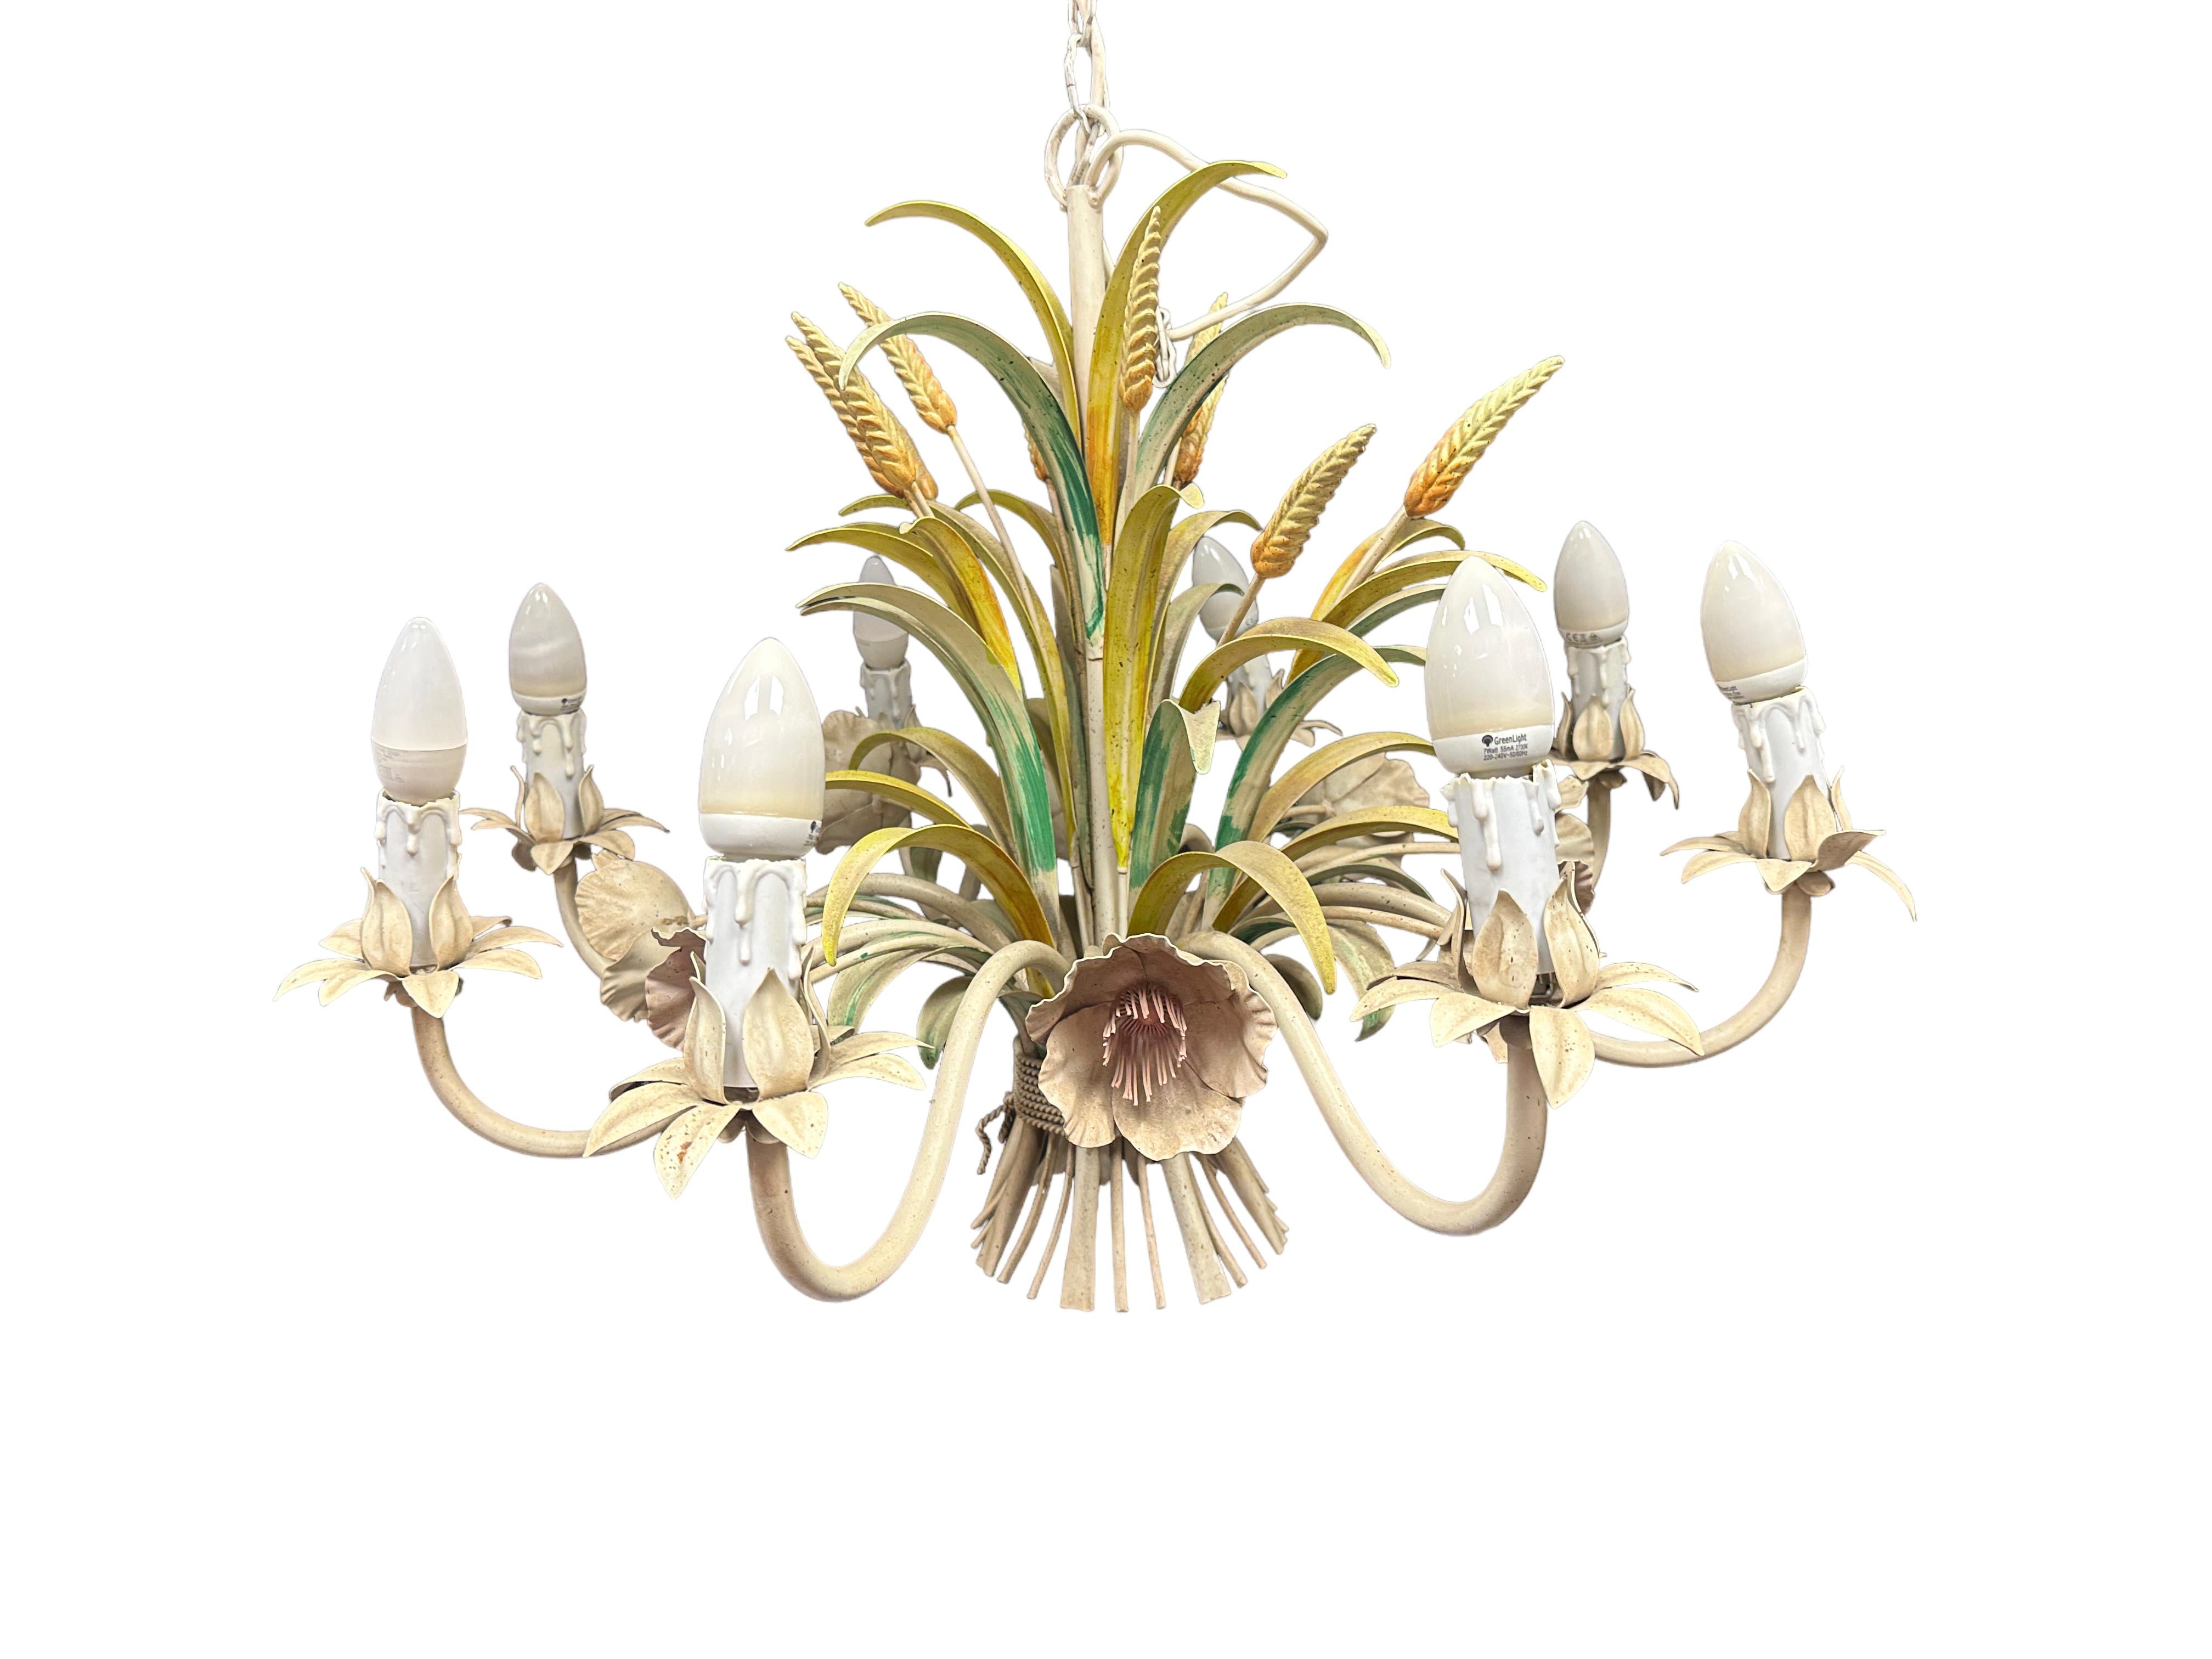 Hollywood Regency Beautiful Italian Tole Florentine Florence Polychrome 8 Light Chandelier 1960s For Sale